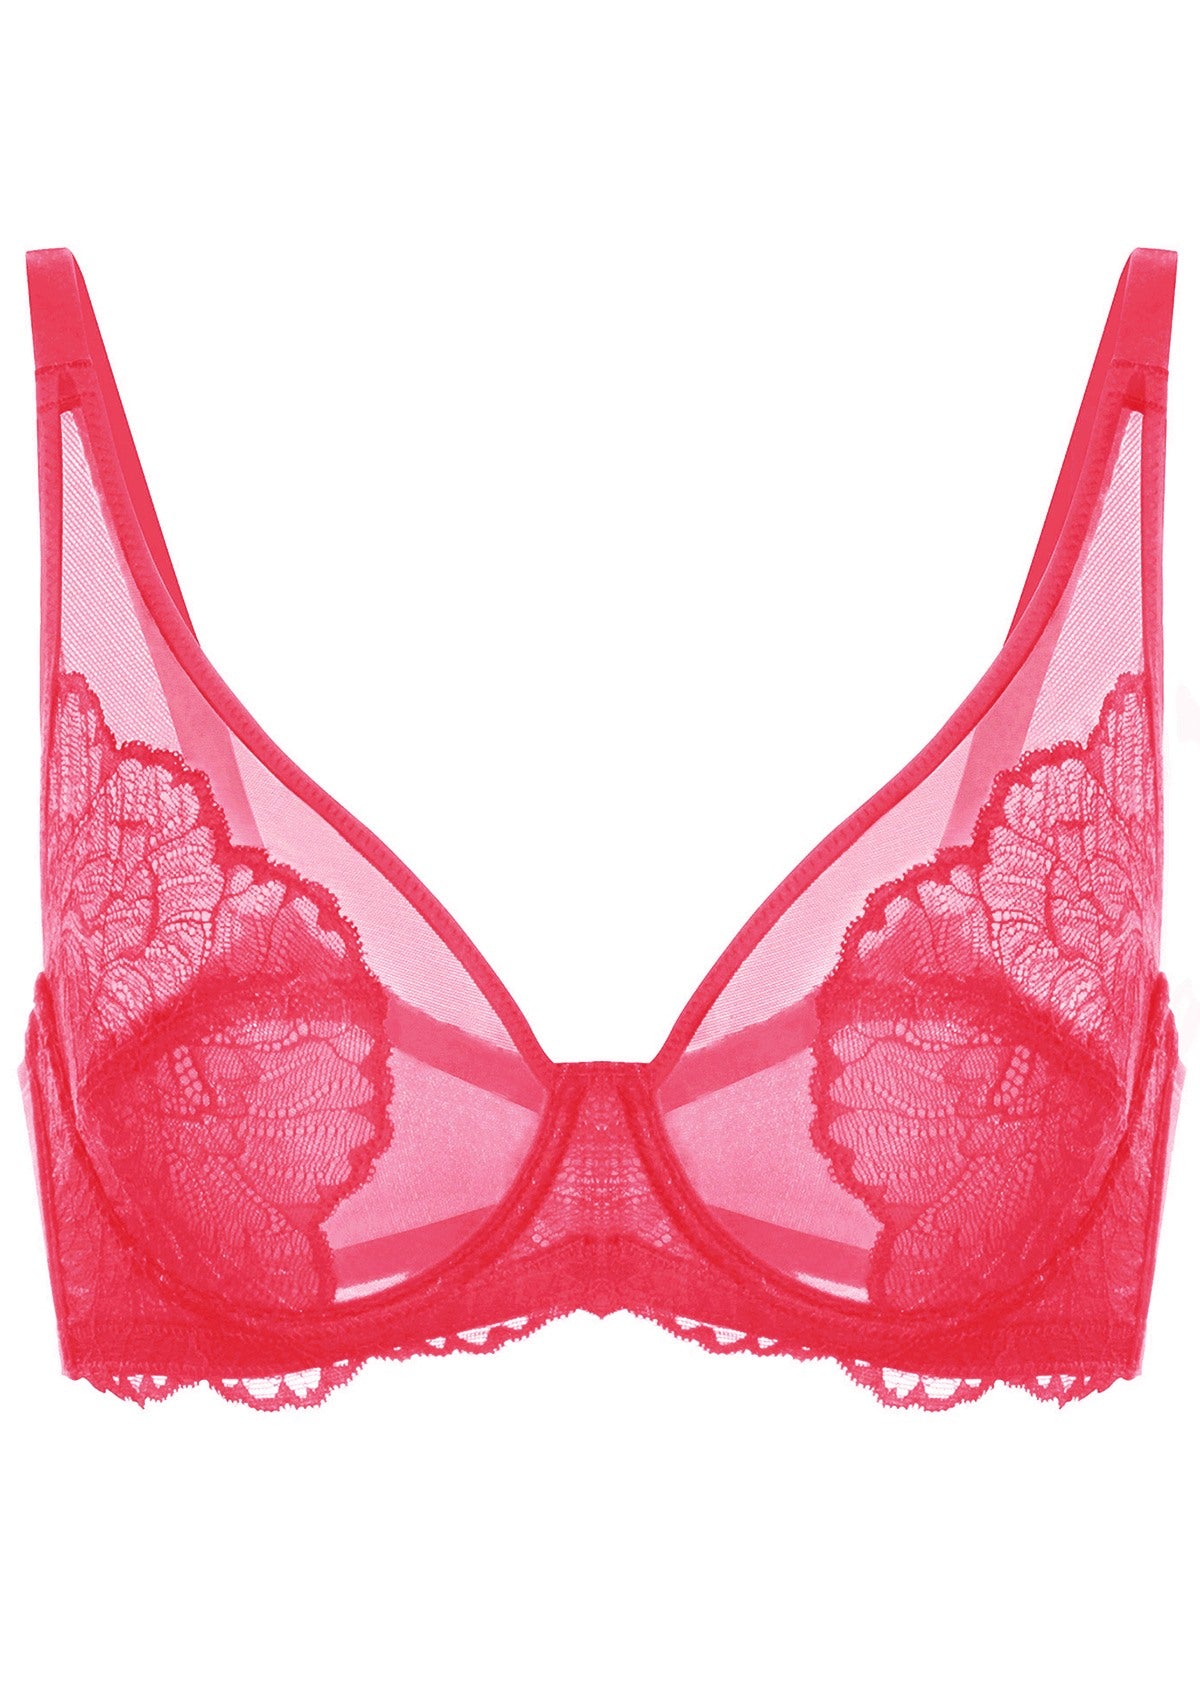 HSIA Blossom Unlined Lace Underwire Bra - Burgundy / 38 / D